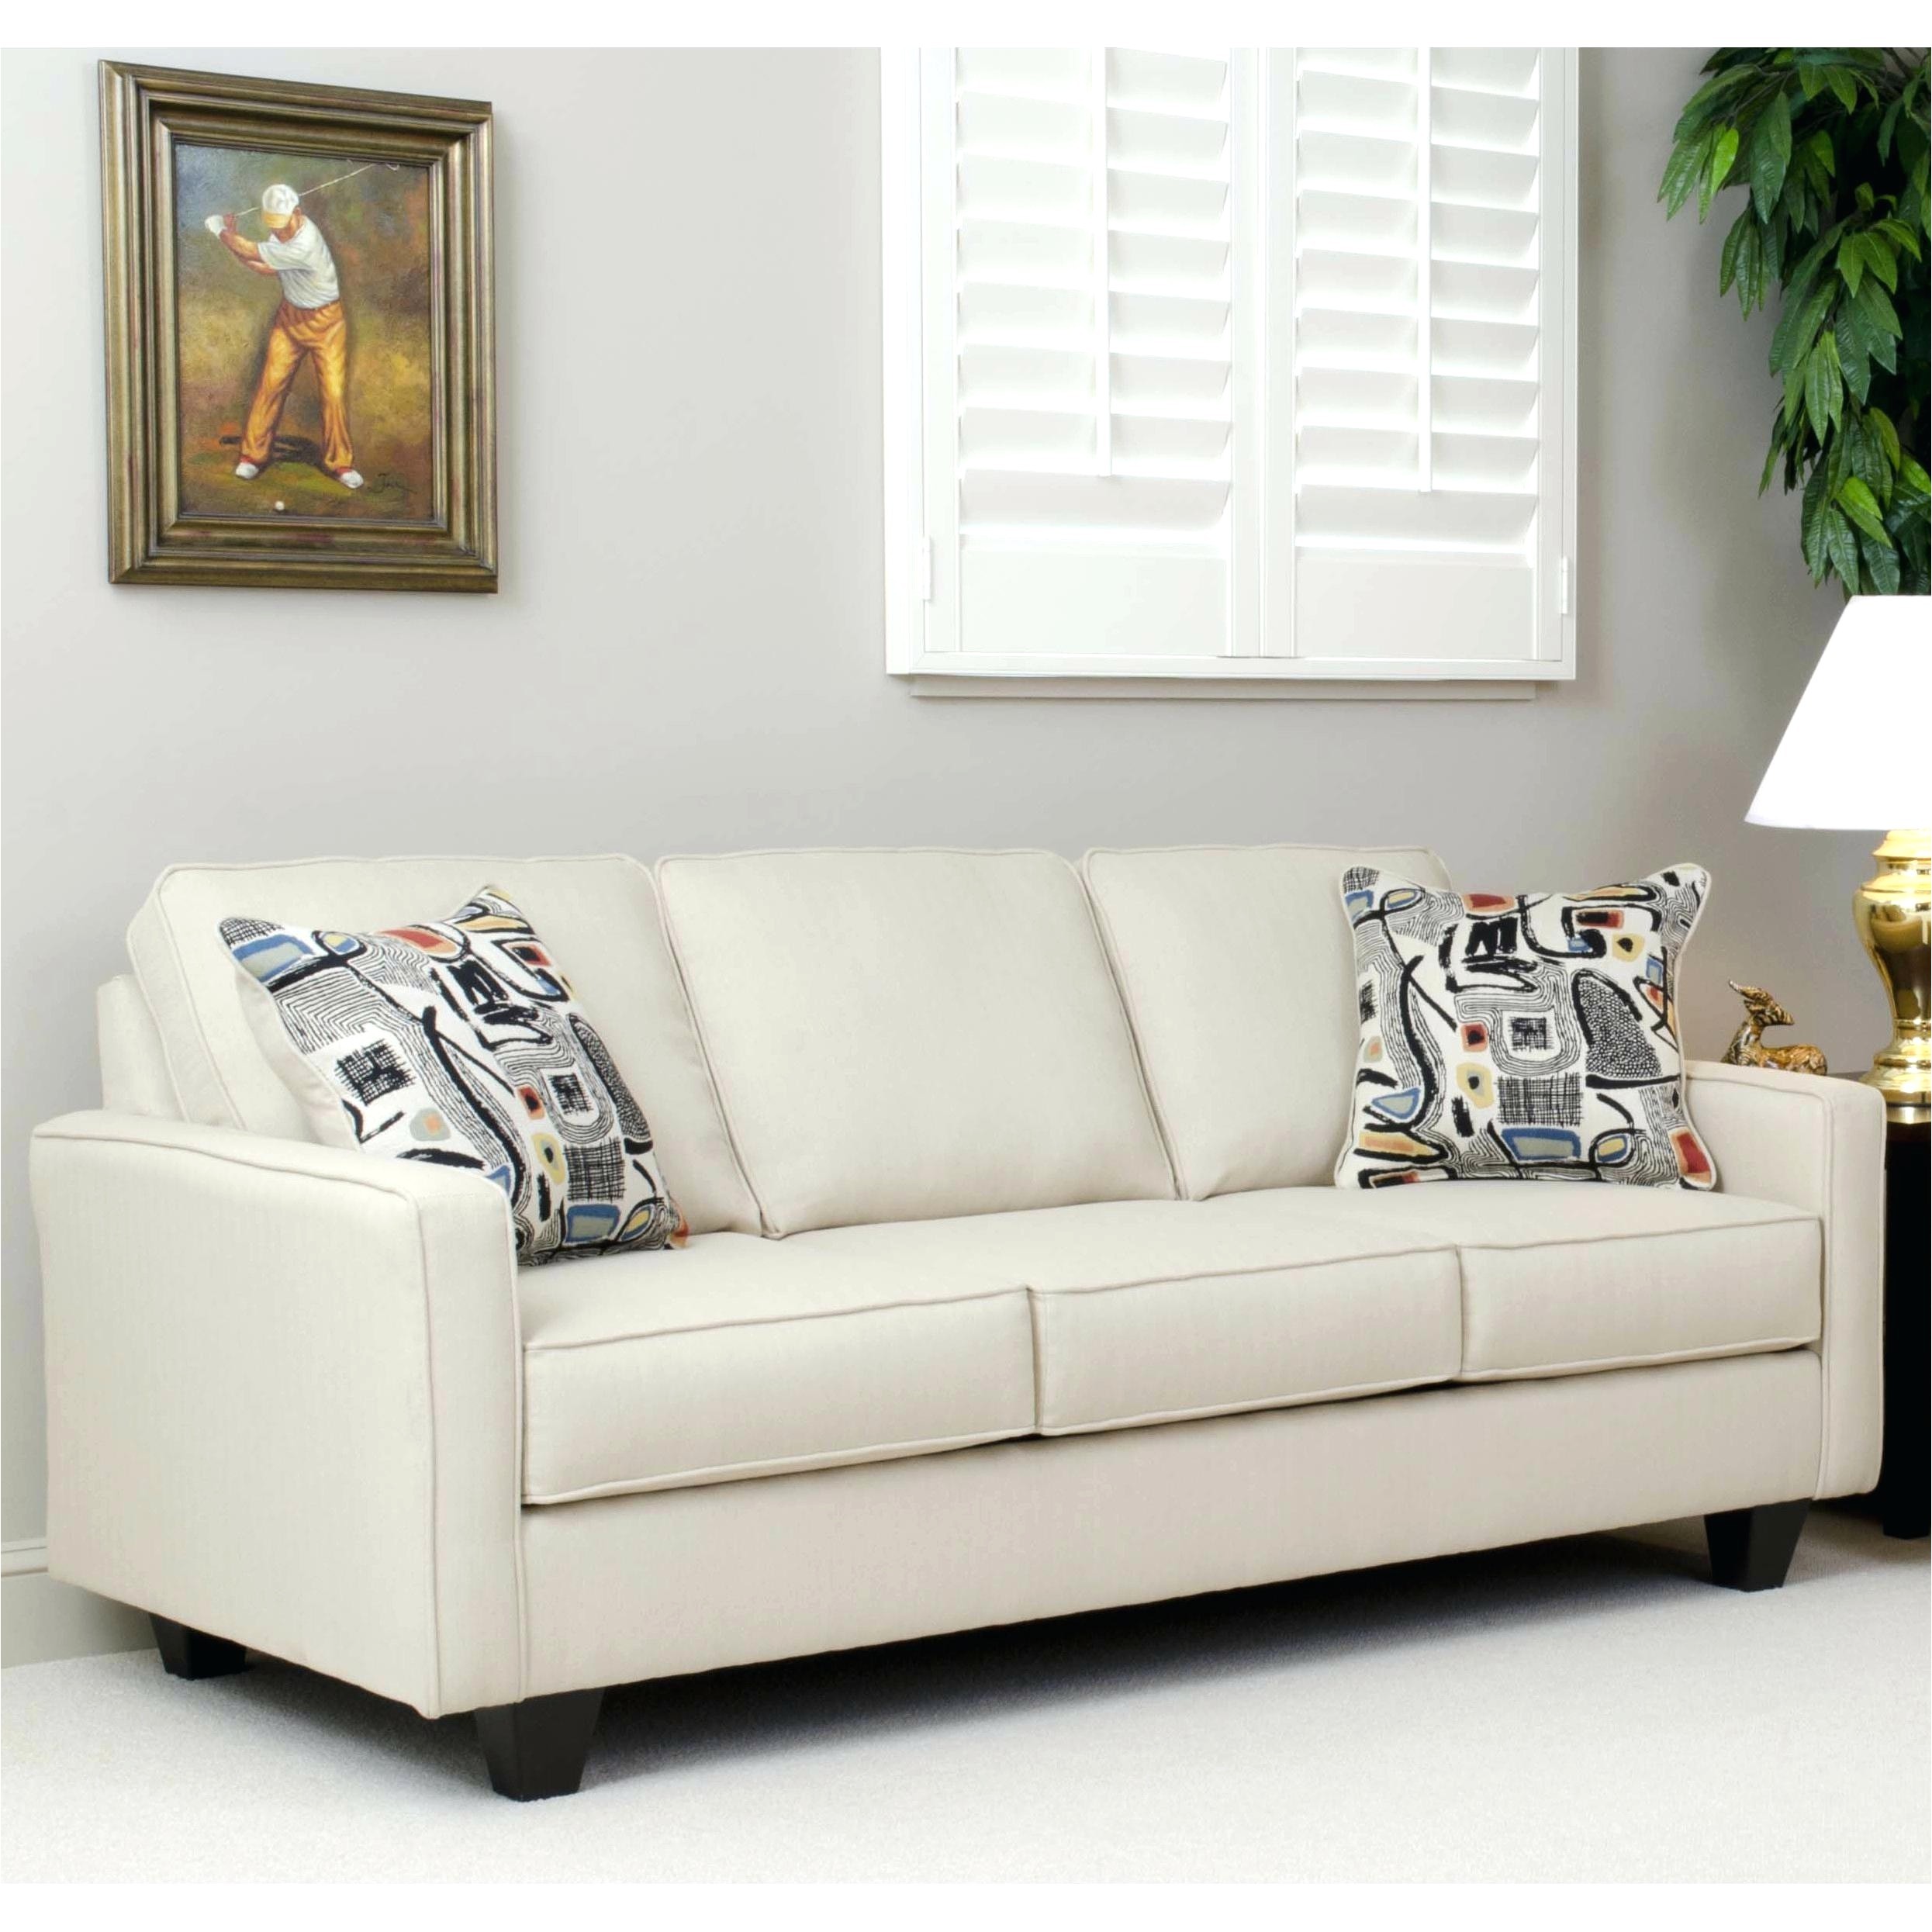 macys leather loveseat petrie sofa mid century modern couch tufted s home design full size of